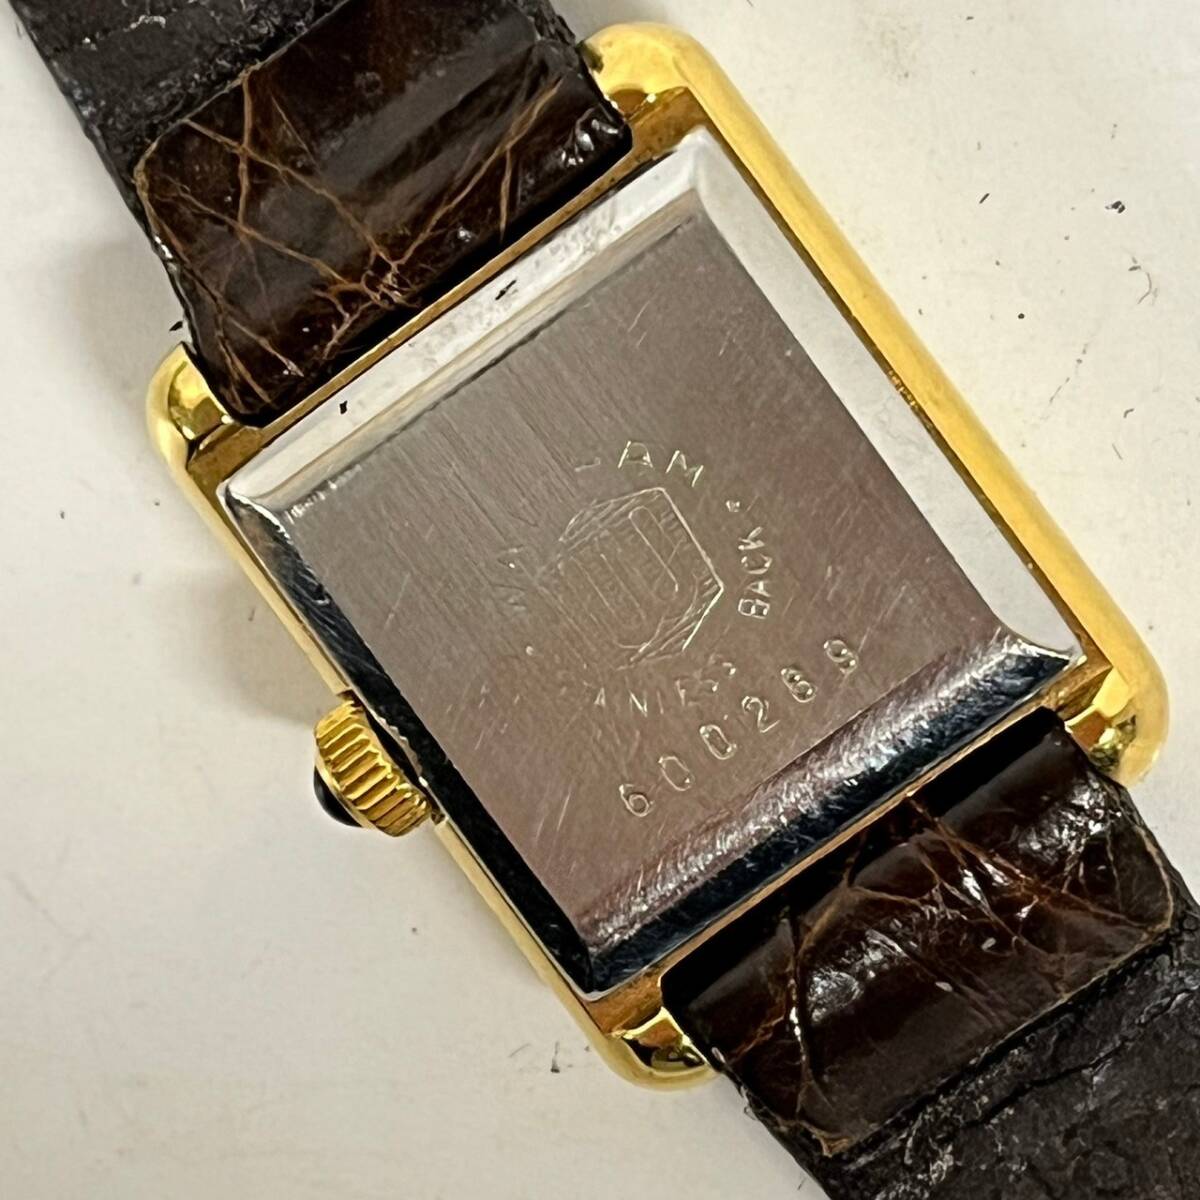 1 jpy ~[ immovable ] Waltham WALTHAM Cal.HT-201 hand winding lady's wristwatch silver face square 2 hands 17 stone Switzerland made G116330